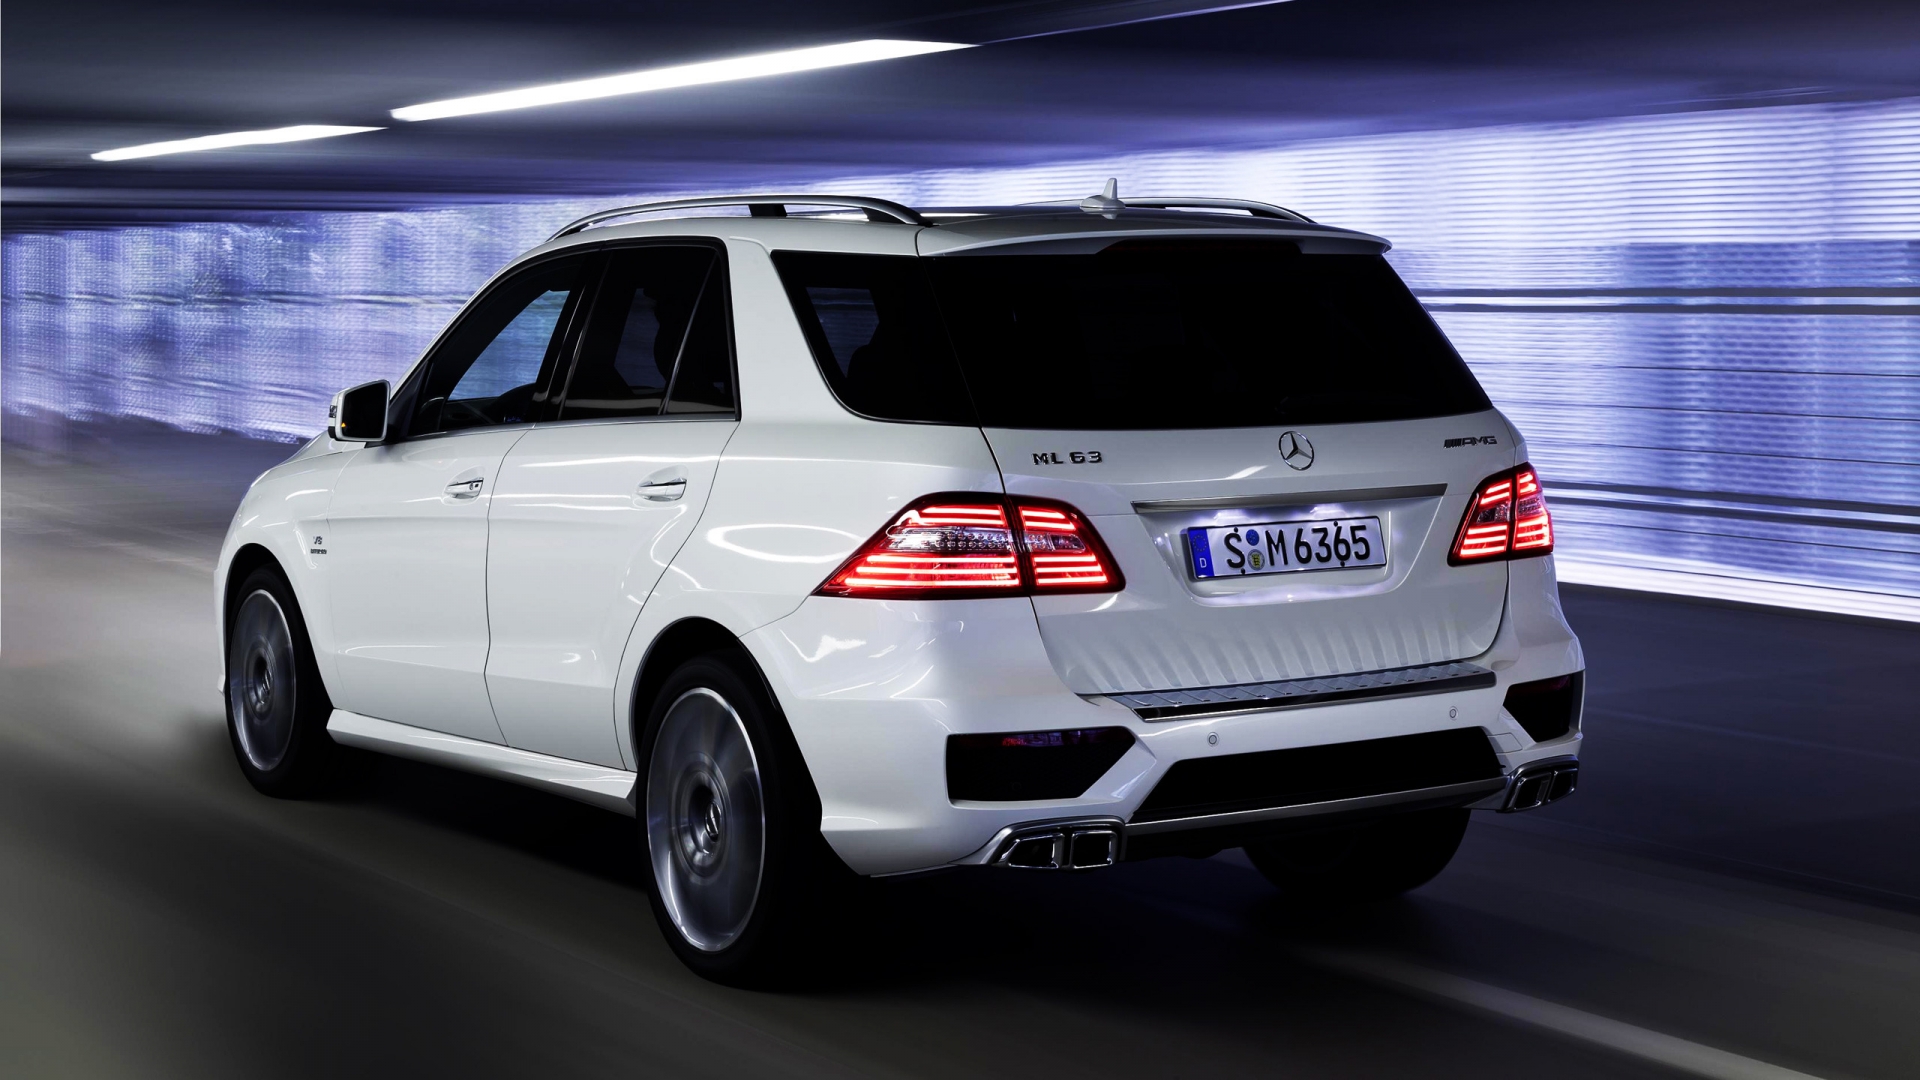 Mercedes Benz ML 63 AMG 2012 Rear for 1920 x 1080 HDTV 1080p resolution